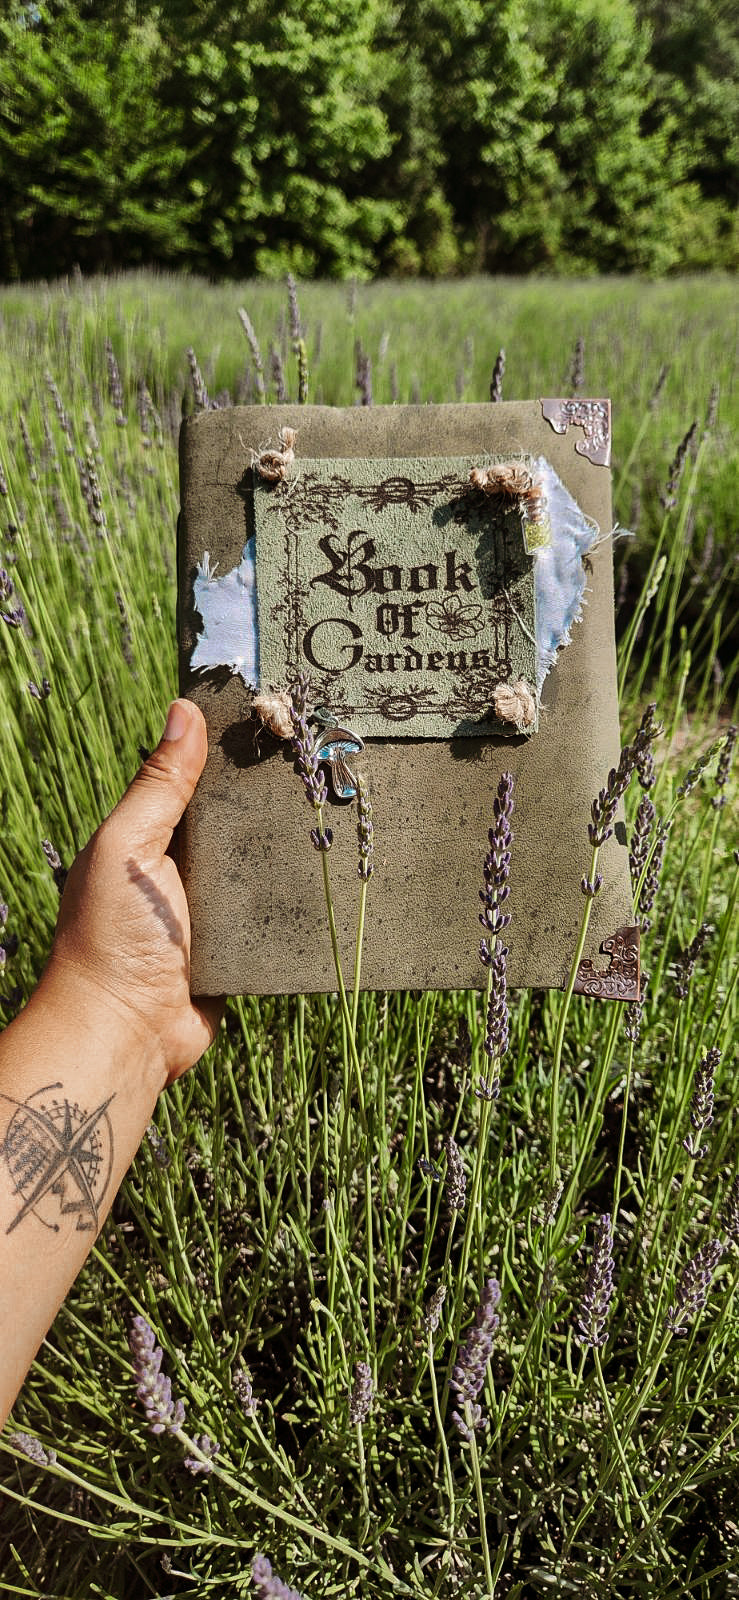 Book of Gardens leather journal